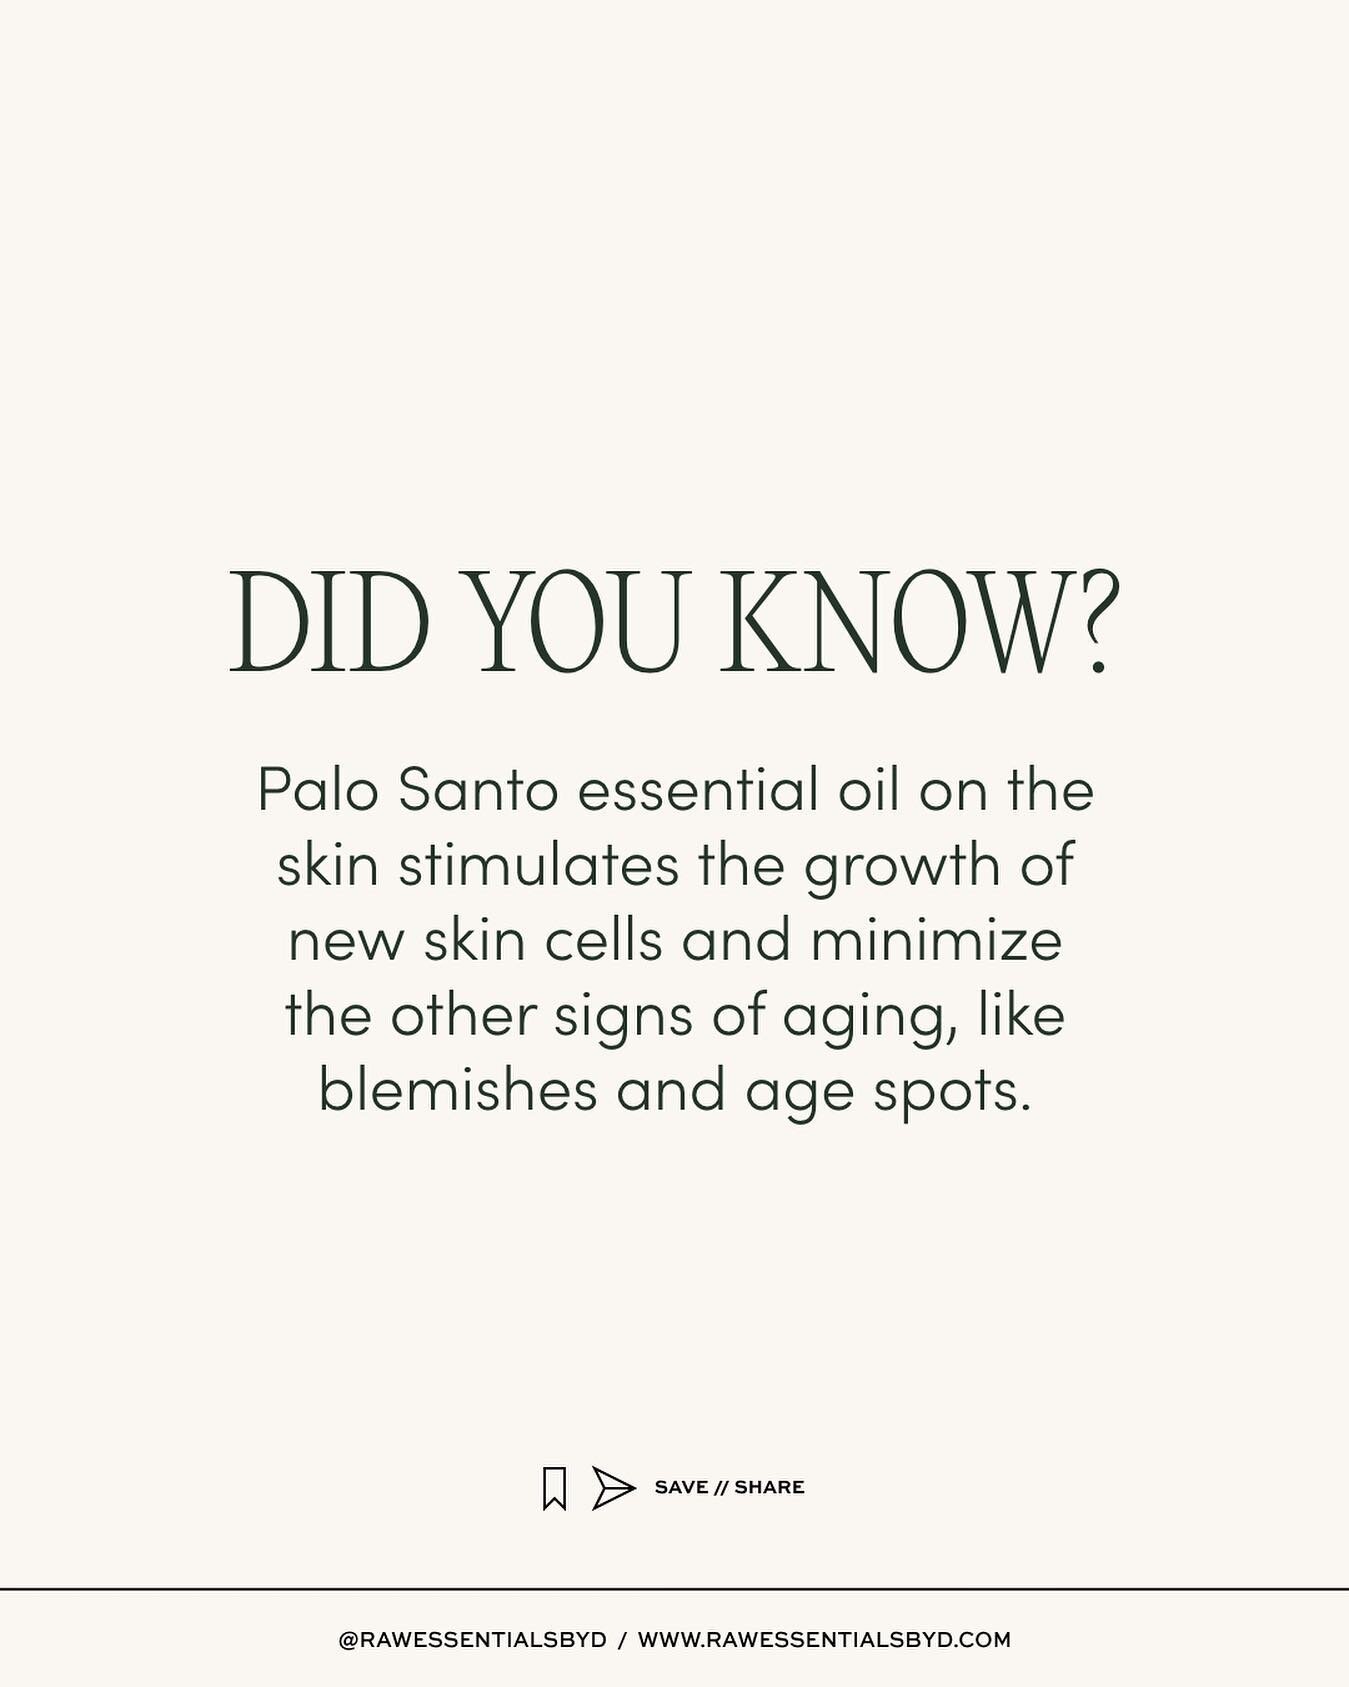 Palo santo is known as &lsquo;holy wood&rsquo; for a reason 🌿 

Click the 🔗 in my bio to grab your oils!